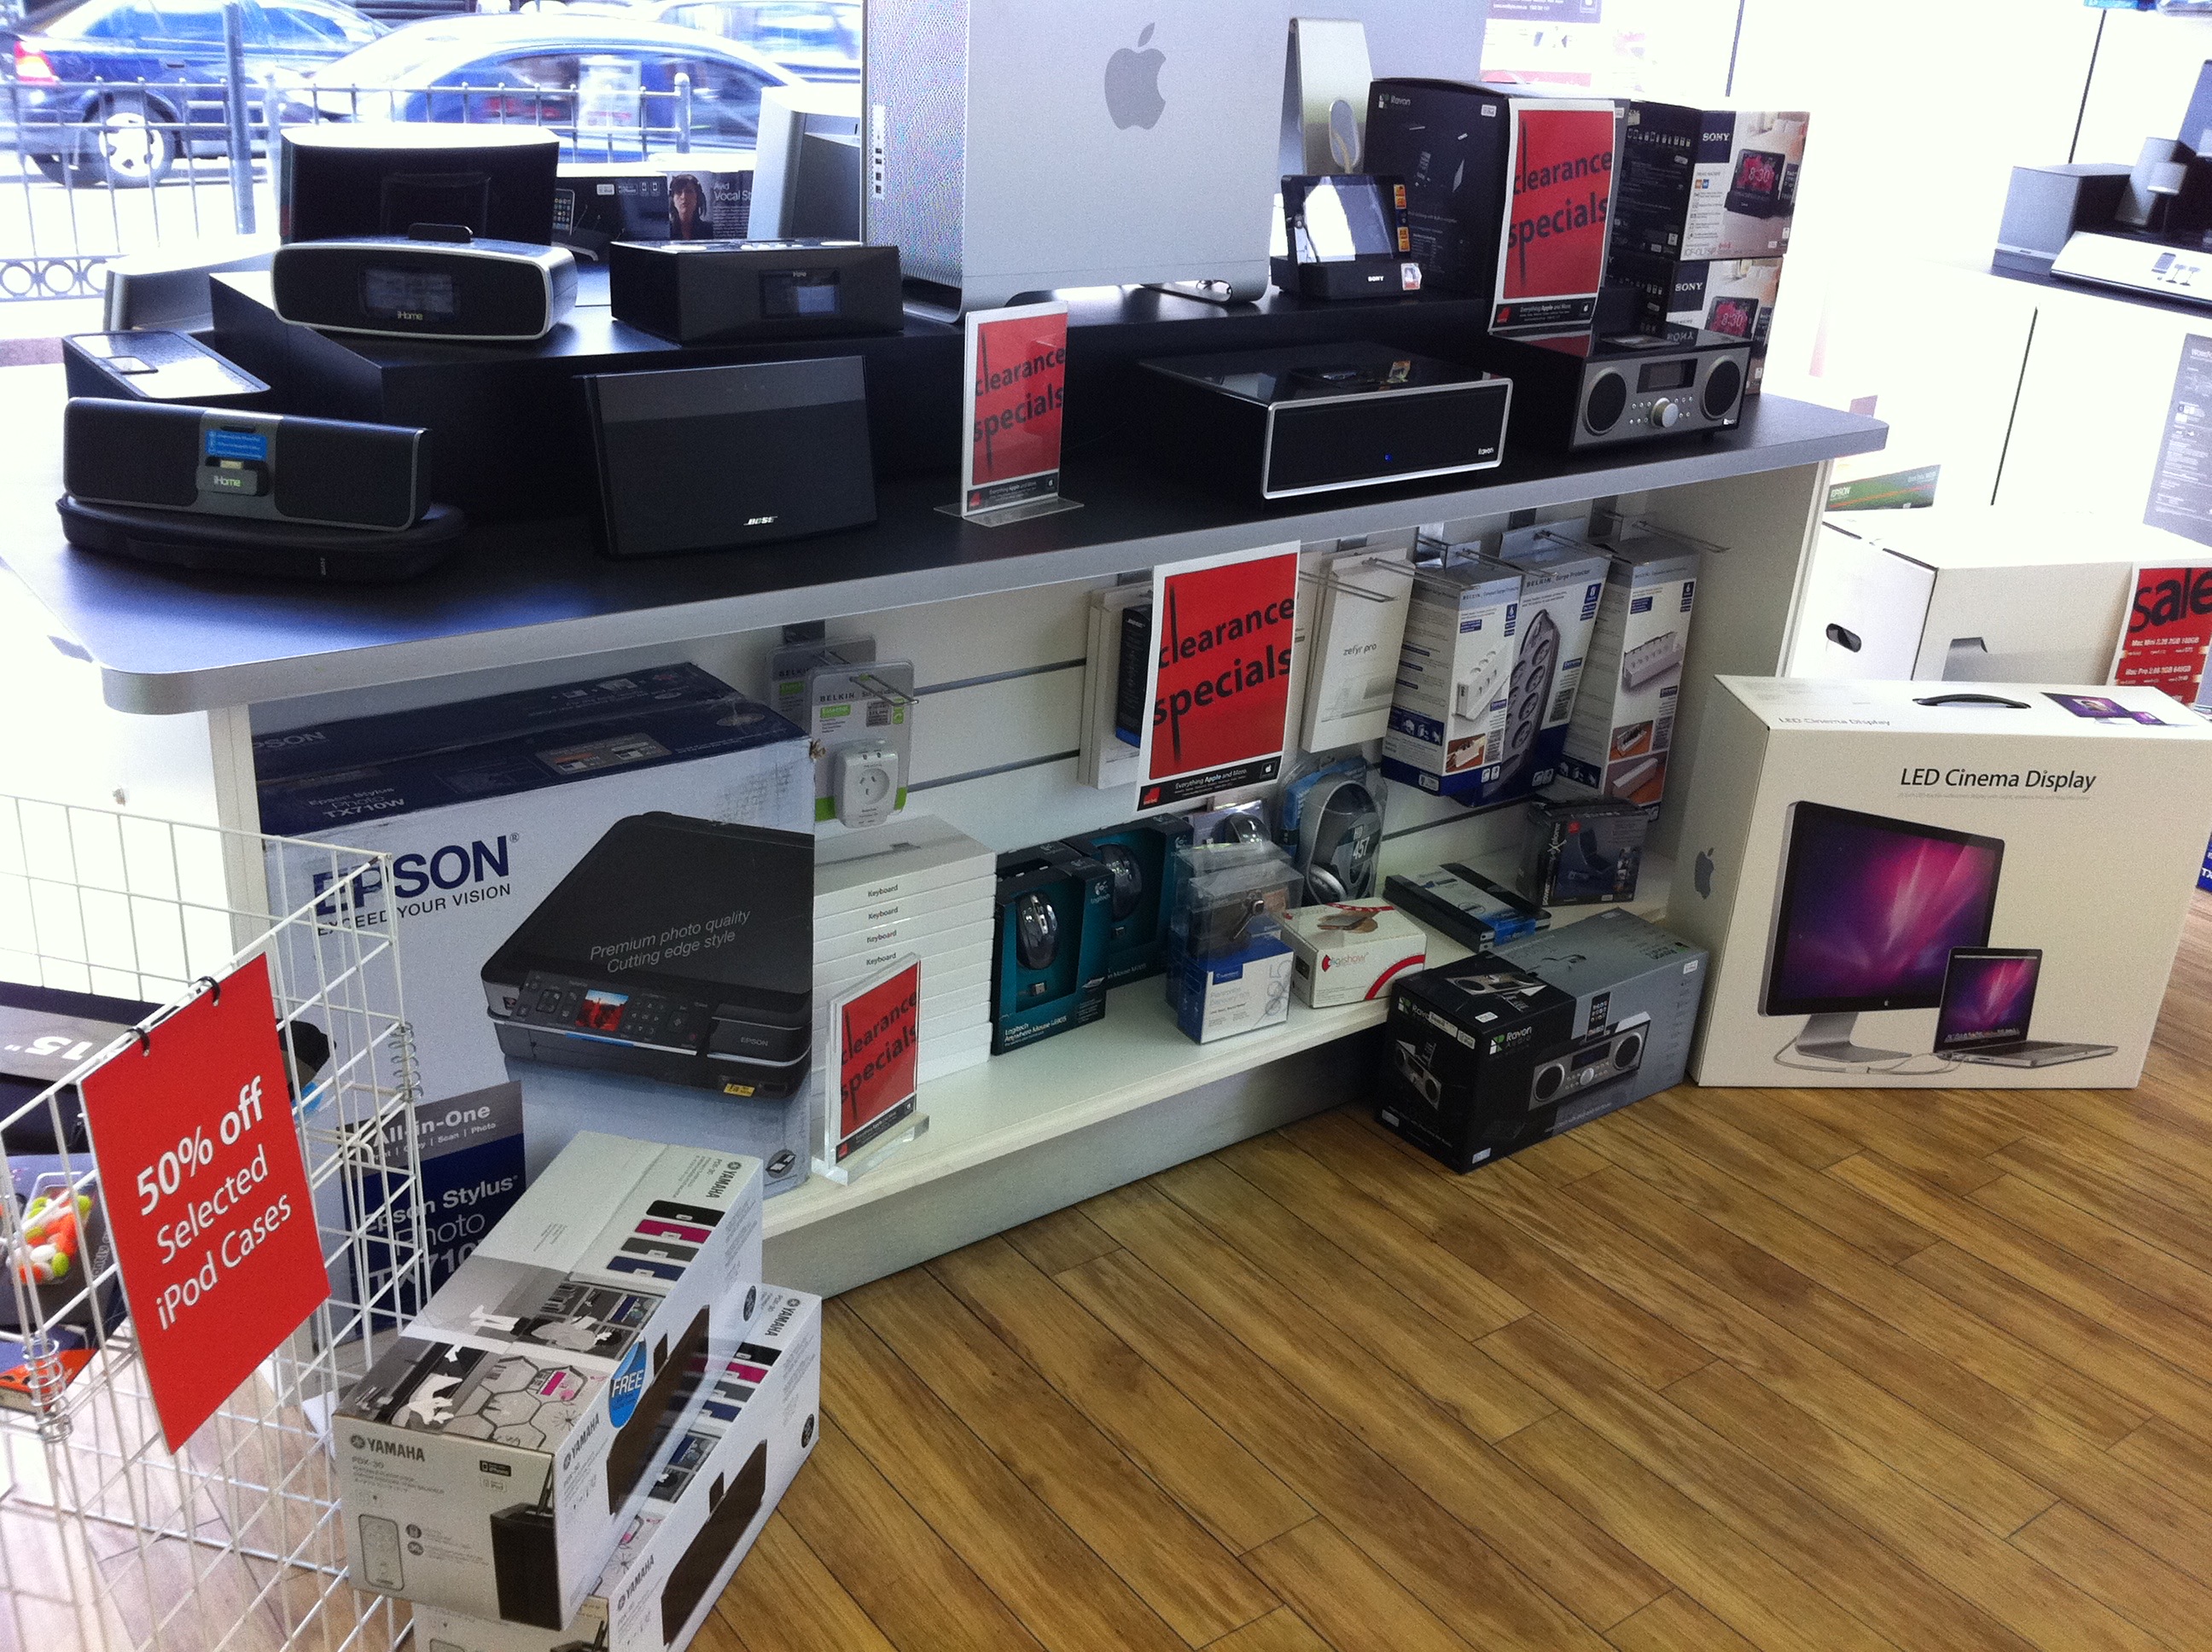 photo showing iPod dock clearance specials and other accessories